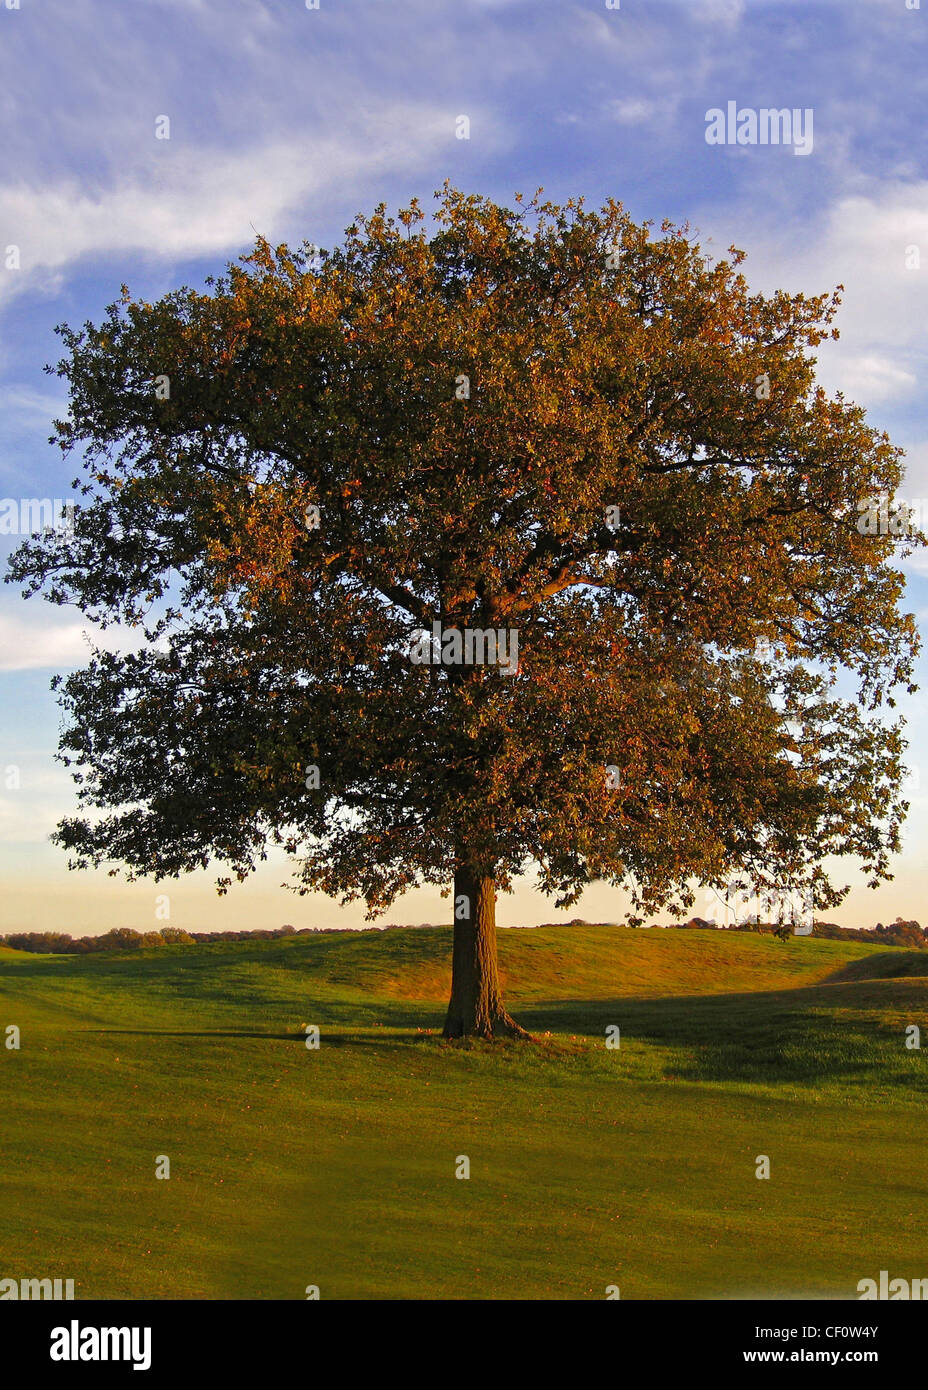 lone single tree in field with autumn leaves Stock Photo